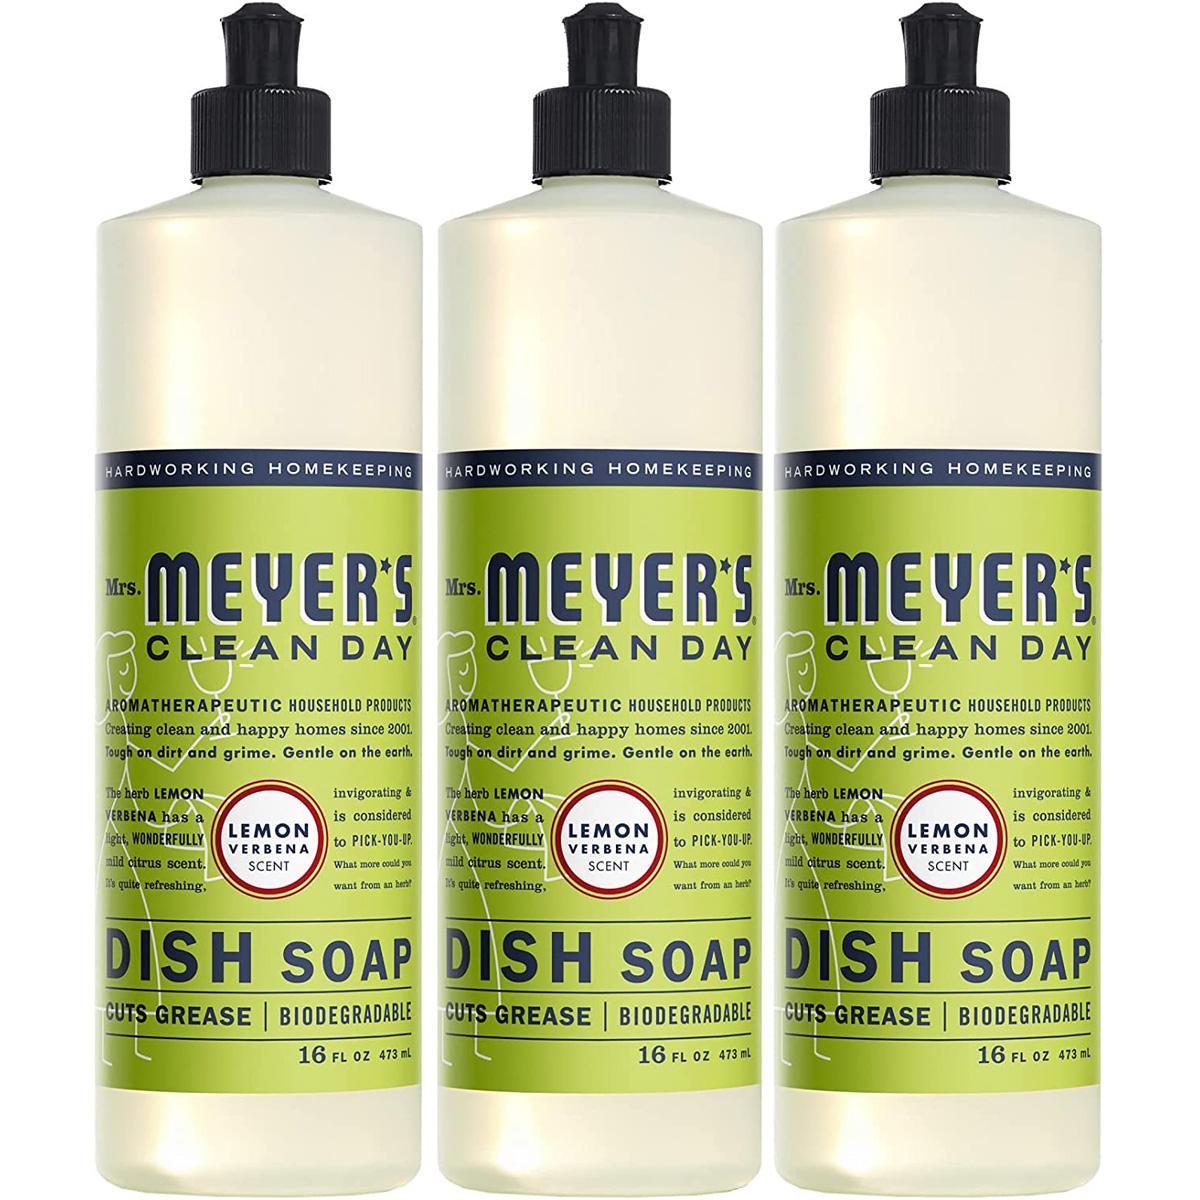 3 Mrs Meyers Clean Day Dishwashing Liquid Soap for $6.99 Shipped